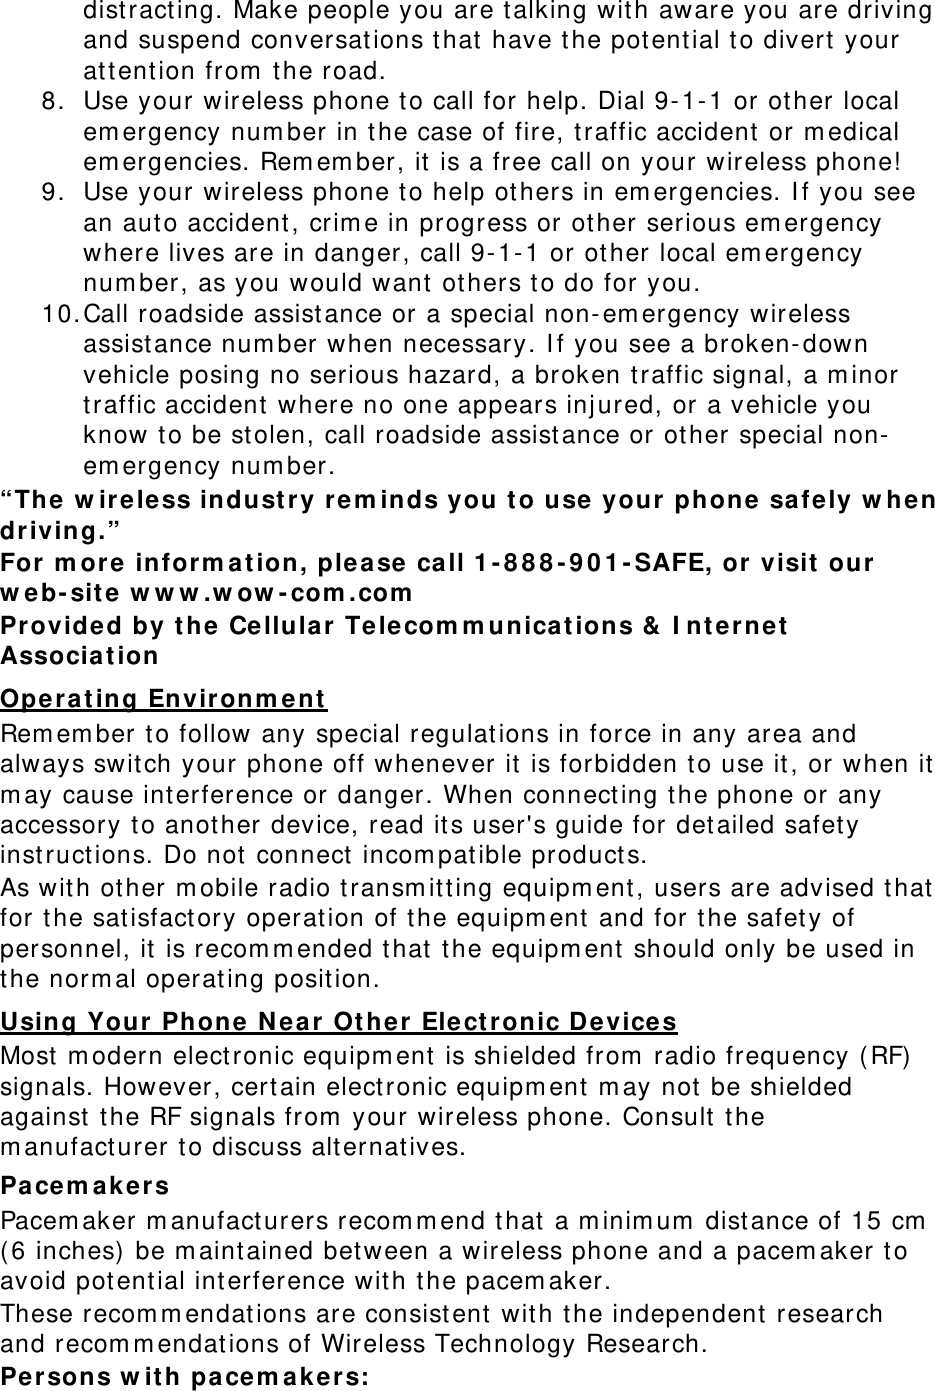 dist ract ing. Make people you are talking wit h aware you are driving and suspend conversat ions t hat have t he potent ial to divert  your at tent ion from  t he road. 8. Use your wireless phone t o call for help. Dial 9- 1- 1 or ot her local em ergency num ber in the case of fire, t raffic accident  or m edical em ergencies. Rem em ber, it is a free call on your wireless phone!  9. Use your wireless phone to help others in em ergencies. I f you see an aut o accident , crim e in progress or other serious em ergency where lives are in danger, call 9- 1- 1 or ot her local em ergency num ber, as you would want  others to do for you. 10. Call roadside assist ance or a special non- em ergency wireless assist ance num ber when necessary. I f you see a broken- down vehicle posing no serious hazard, a broken traffic signal, a m inor traffic accident where no one appears inj ured, or a vehicle you know t o be stolen, call roadside assistance or ot her special non-em ergency num ber. “The w ir e le ss indust ry rem inds you t o use your  phone sa fely w hen driving.” For m ore inform a tion, plea se call 1 - 8 8 8 - 9 0 1 - SAFE, or visit our  w e b- sit e w w w .w ow - com .com  Provide d by t he  Cellular Telecom m unicat ions &amp;  I nt ernet  Associa t ion  Ope r a t ing Environm e nt  Rem em ber to follow any special regulat ions in force in any area and always swit ch your phone off whenever it  is forbidden to use it, or when it  m ay cause int erference or danger. When connect ing t he phone or any accessory t o another device, read it s user&apos;s guide for det ailed safet y instructions. Do not  connect incom pat ible product s. As with other m obile radio transm it t ing equipm ent , users are advised t hat for the sat isfactory operat ion of t he equipm ent  and for t he safet y of personnel, it  is recom m ended t hat t he equipm ent  should only be used in the norm al operat ing posit ion. Using You r  Phone  N e a r Ot he r  Ele ct ronic Device s Most m odern elect ronic equipm ent  is shielded from  radio frequency ( RF) signals. However, cert ain elect ronic equipm ent  m ay not be shielded against  t he RF signals from  your wireless phone. Consult t he m anufact urer t o discuss alt ernatives. Pacem ak e r s Pacem aker m anufacturers recom m end t hat a m inim um  dist ance of 15 cm  ( 6 inches)  be m aintained between a wireless phone and a pacem aker t o avoid pot ent ial int erference with t he pacem aker. These recom m endations are consist ent with t he independent  research and recom m endations of Wireless Technology Research. Persons w it h pa cem ak e r s: 